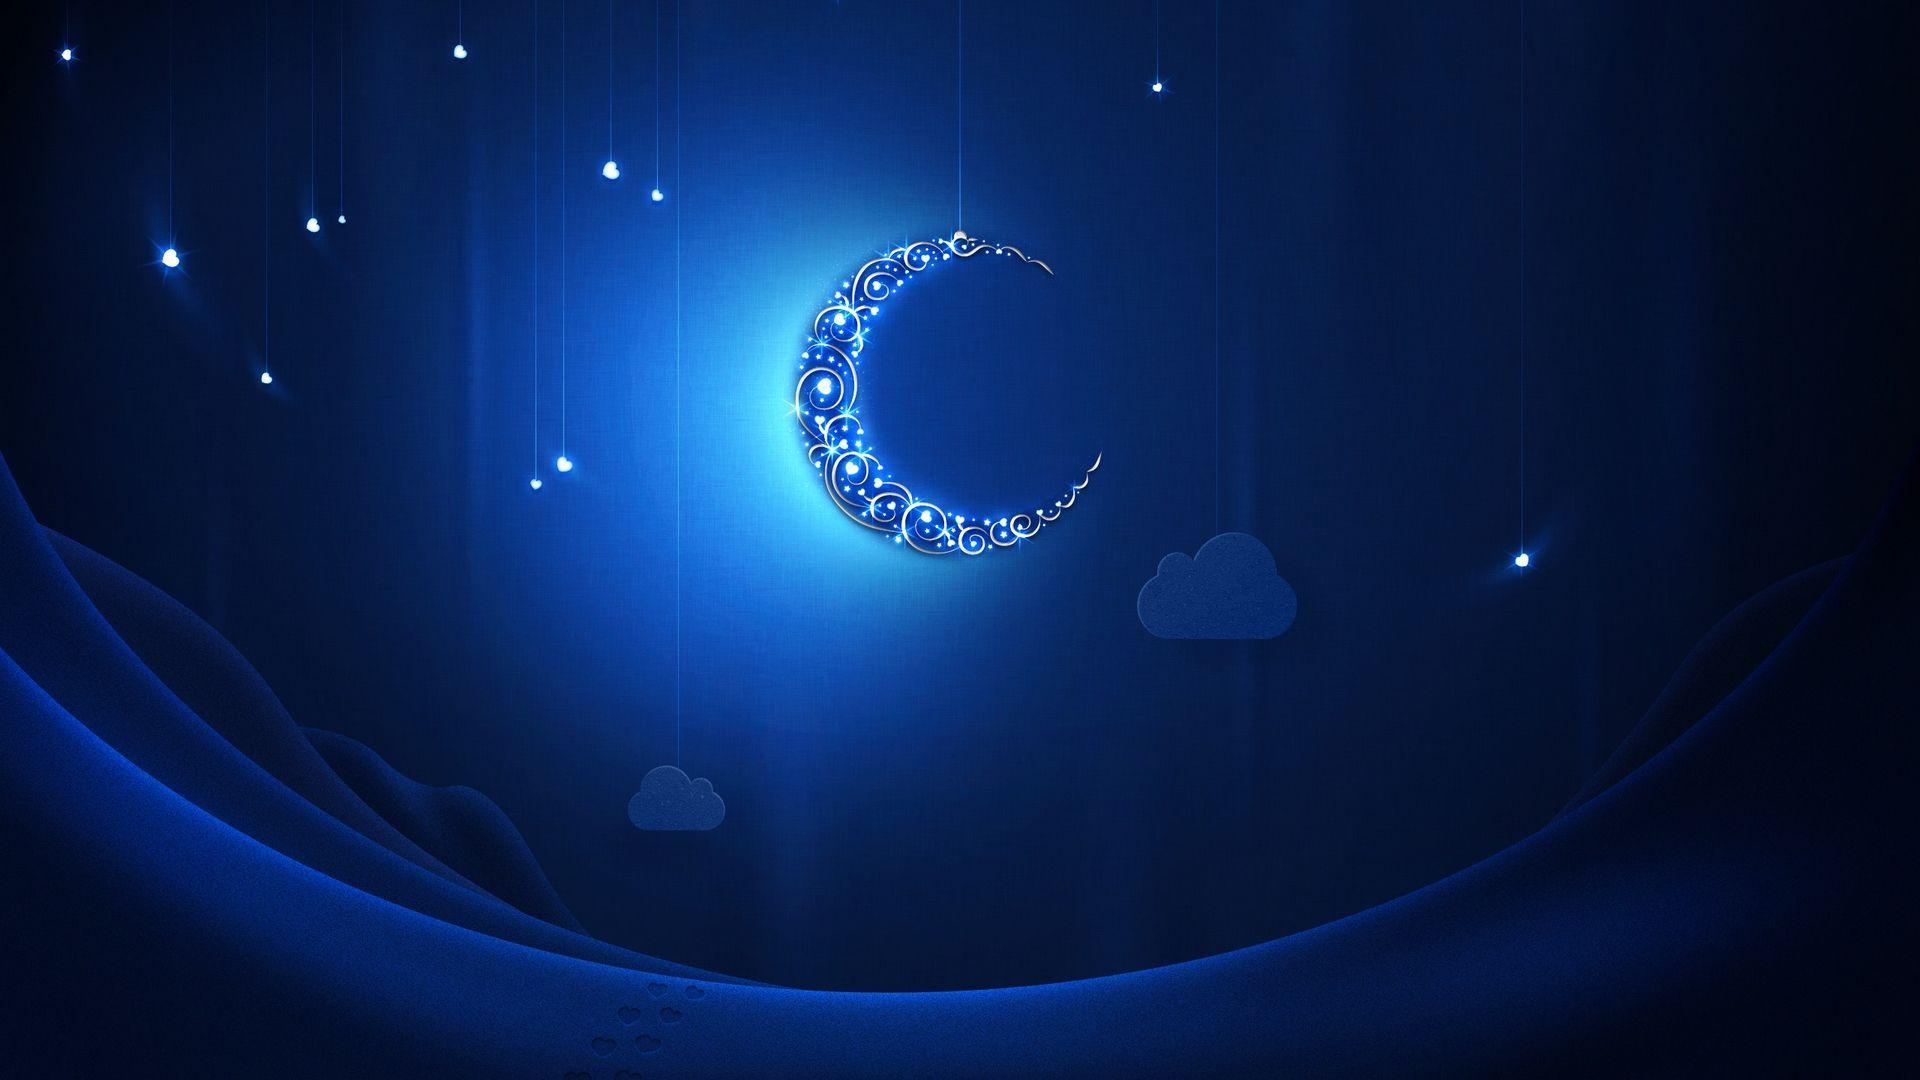 Blue moon at Ramadan wallpaper and image, picture